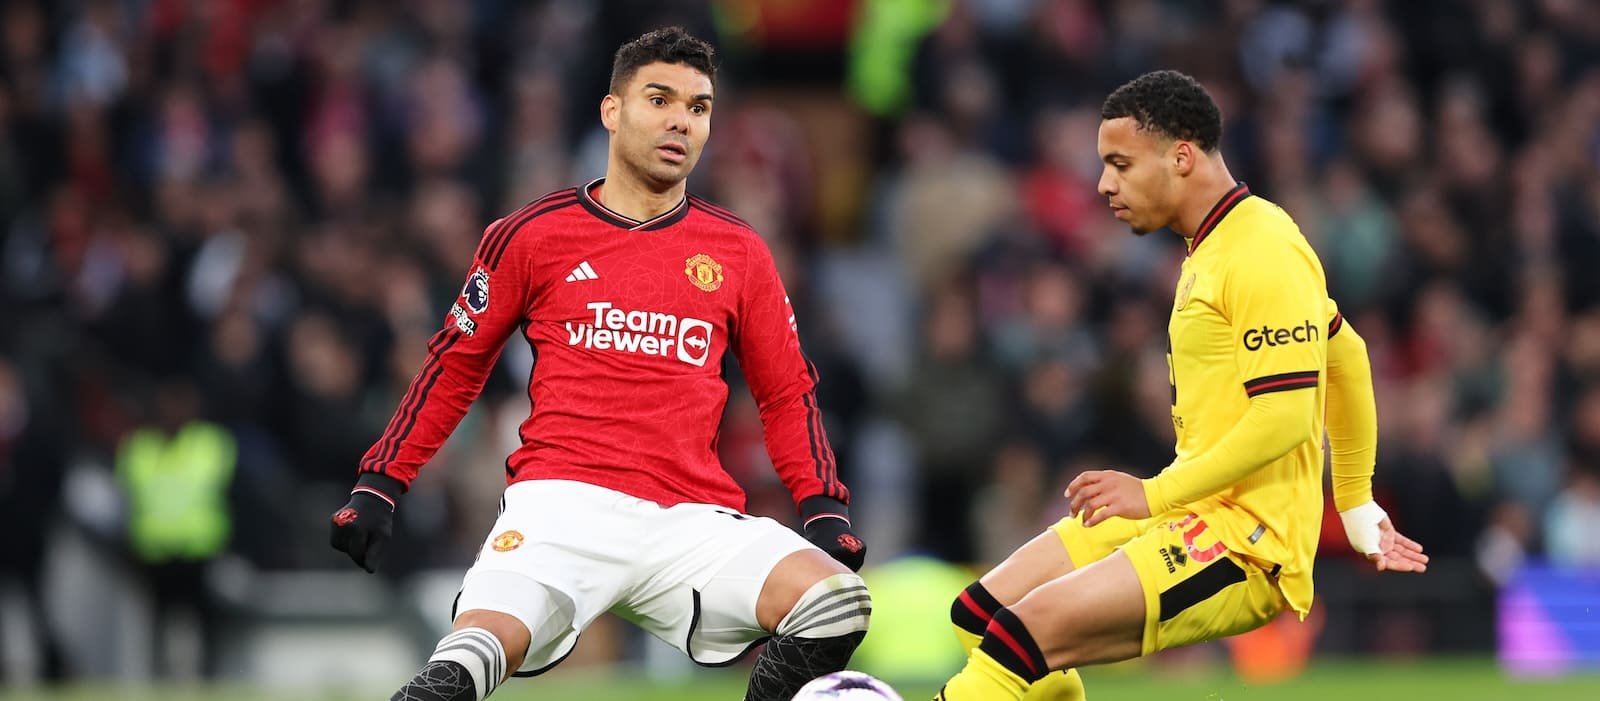 Galatasaray, Fenerbahce both eyeing summer move for Manchester United's Casemiro - Man United News And Transfer News